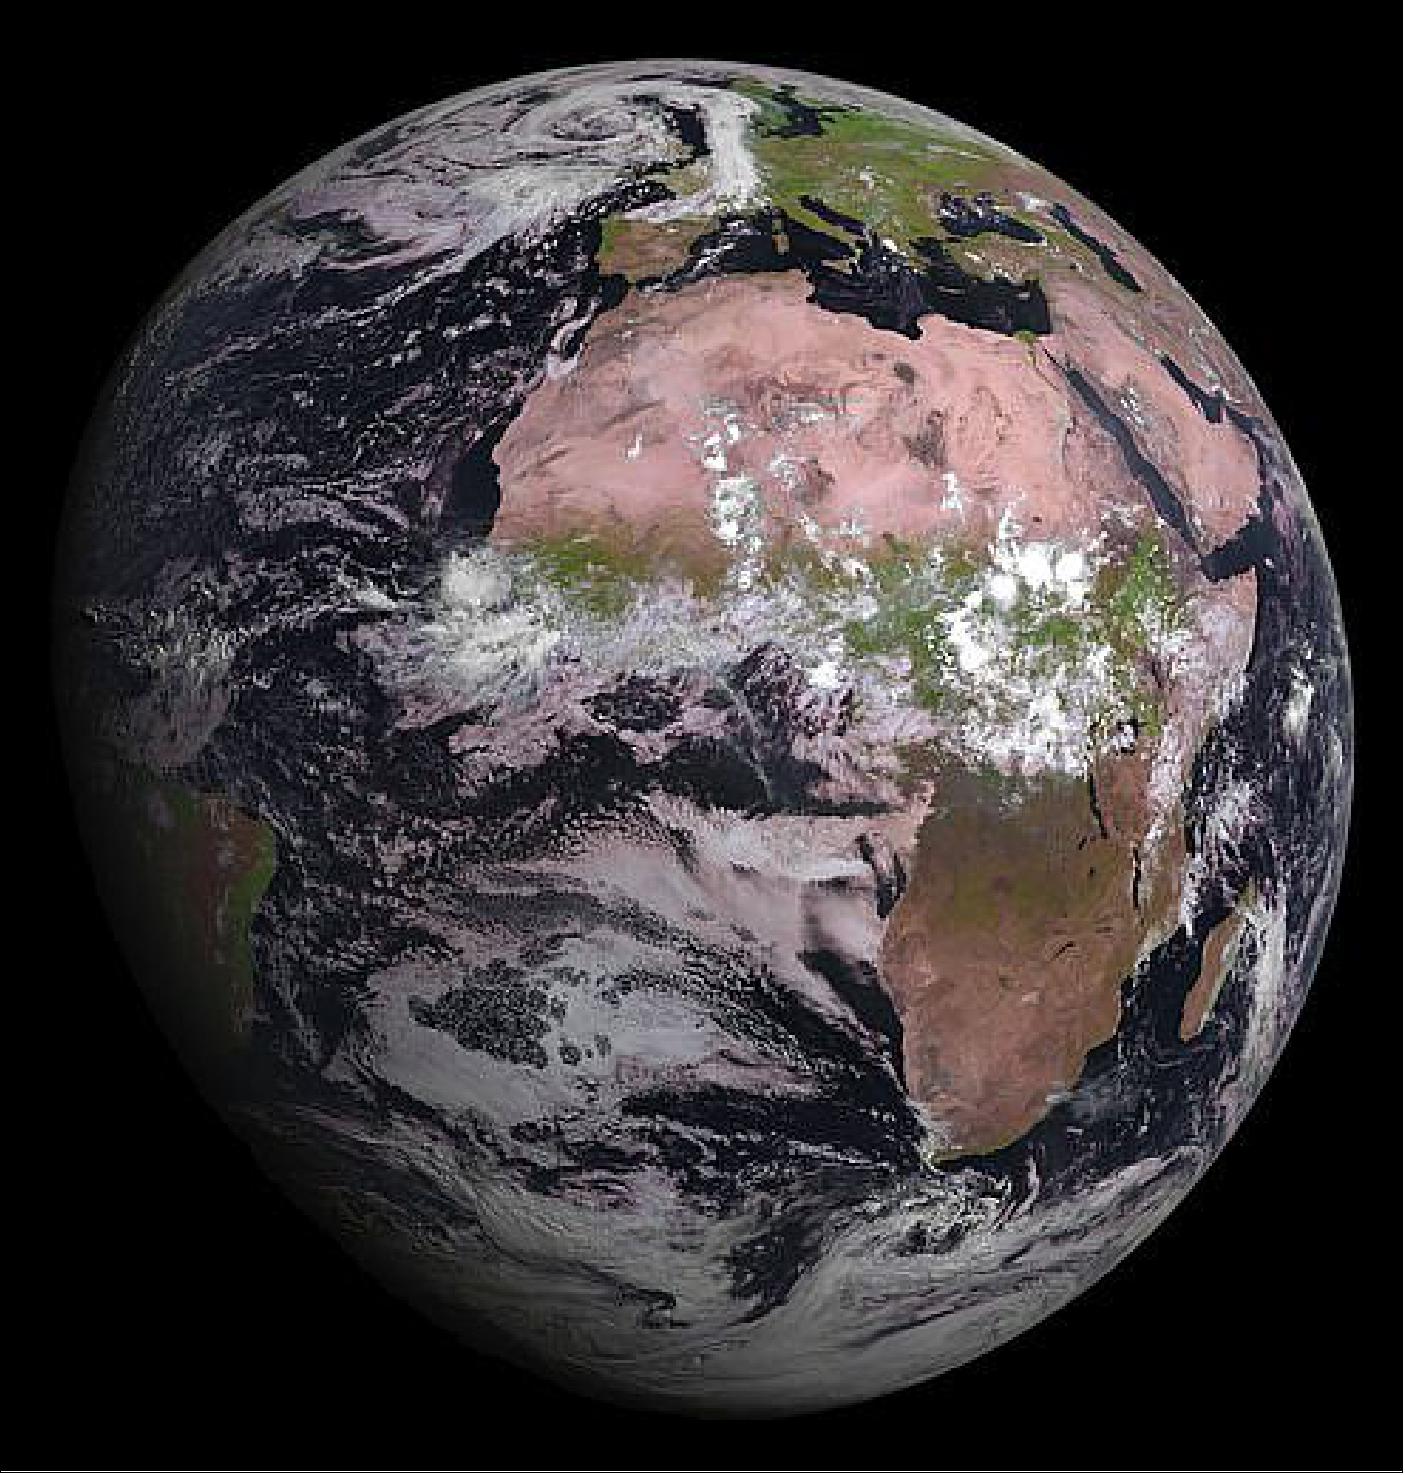 Figure 16: MSG-4, Europe’s latest weather satellite, delivers first image (image credit: EUMETSAT)